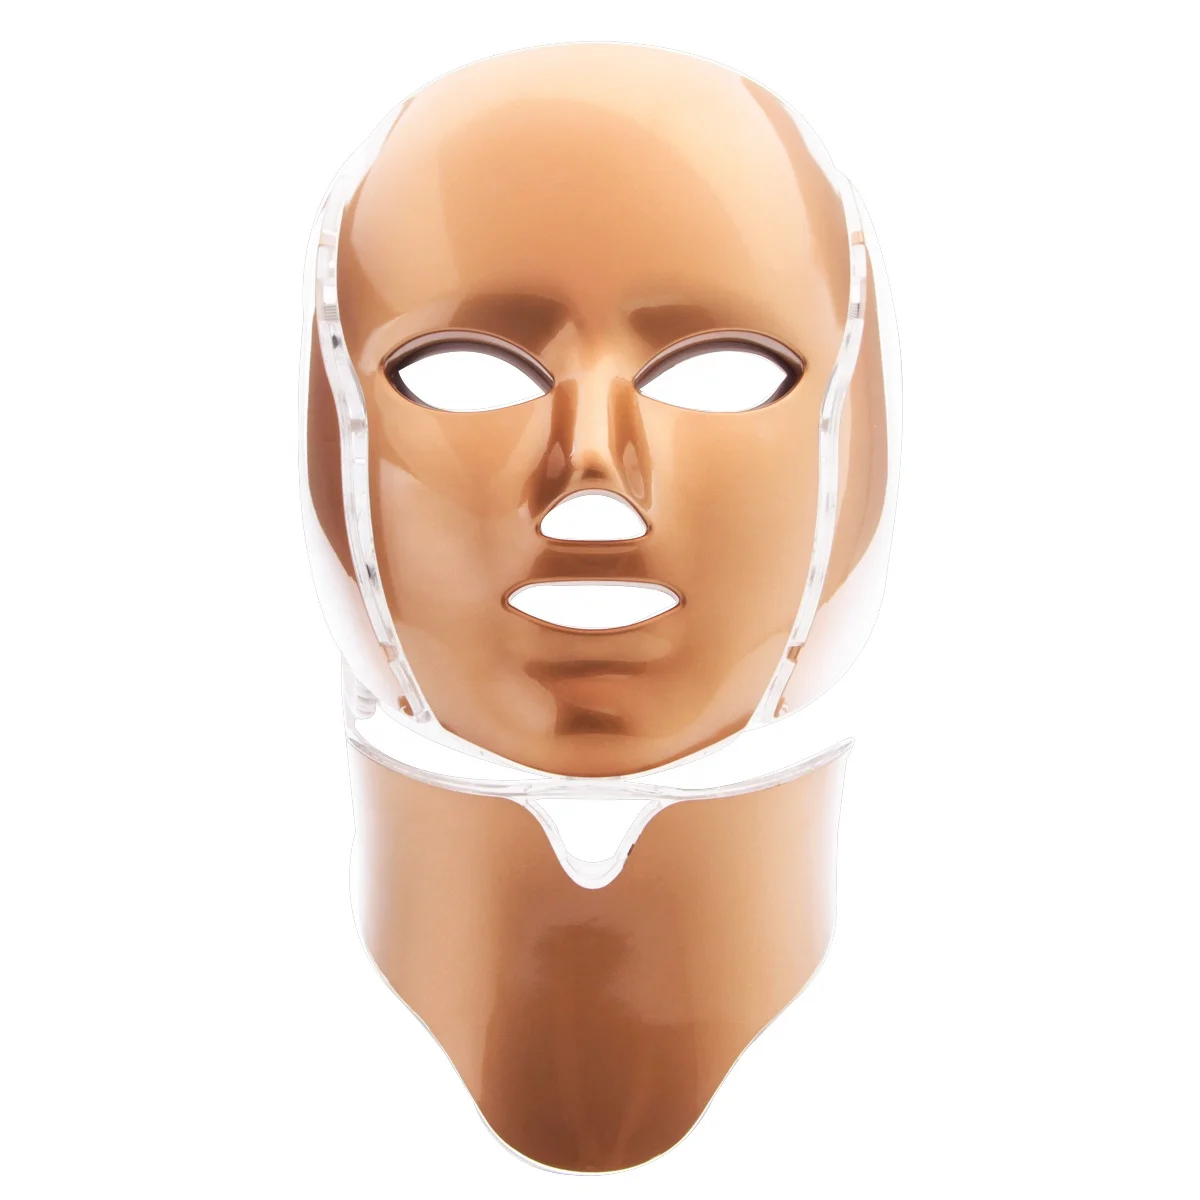 
Photon 7 Color Pdt Light Facial Skin Beauty Therapy Beauty Led Mask For Home Use 